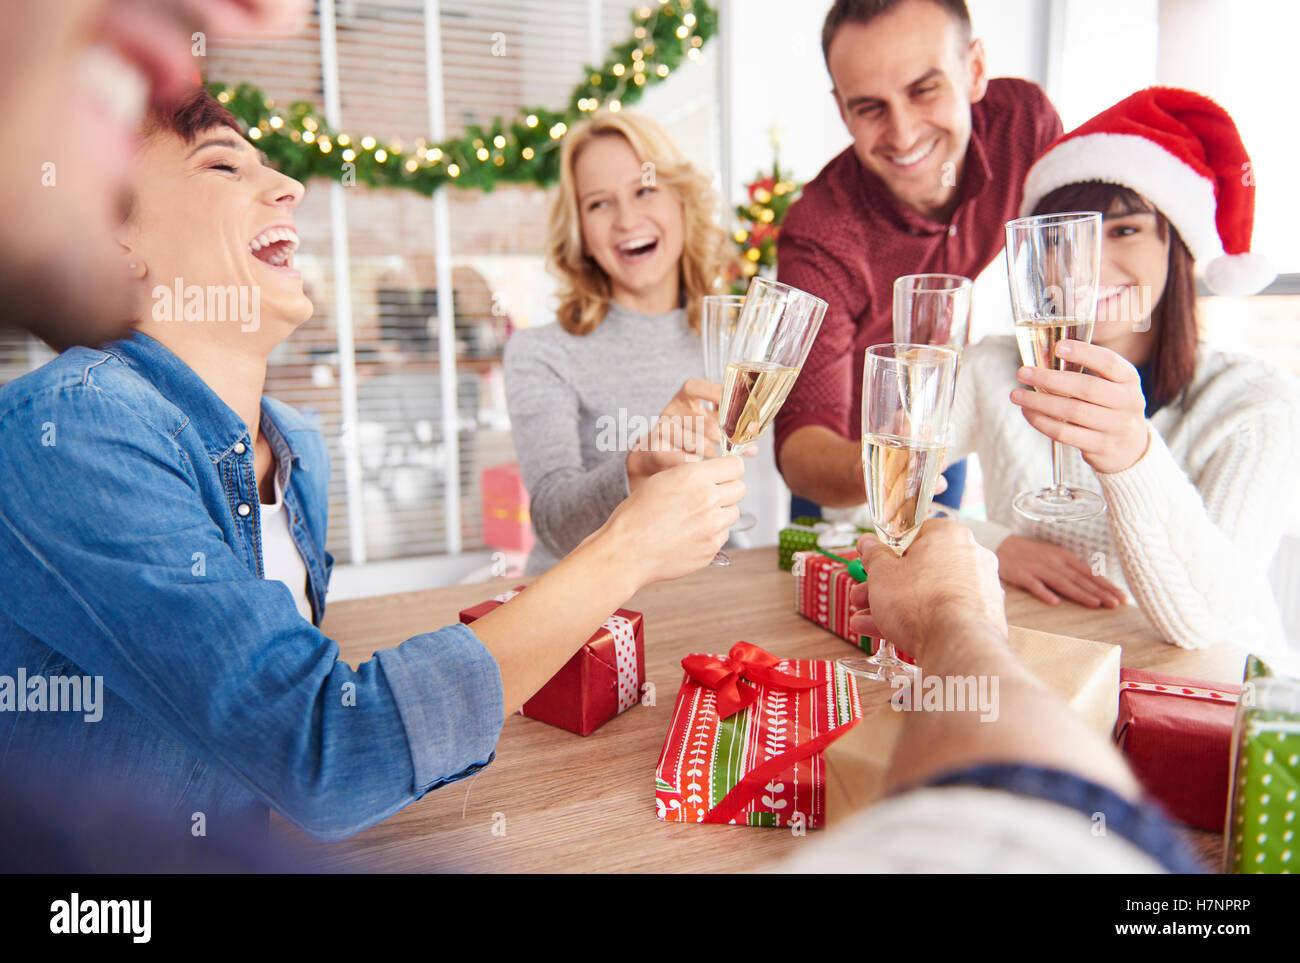 Young team having laughs while making a toast Stock Photo